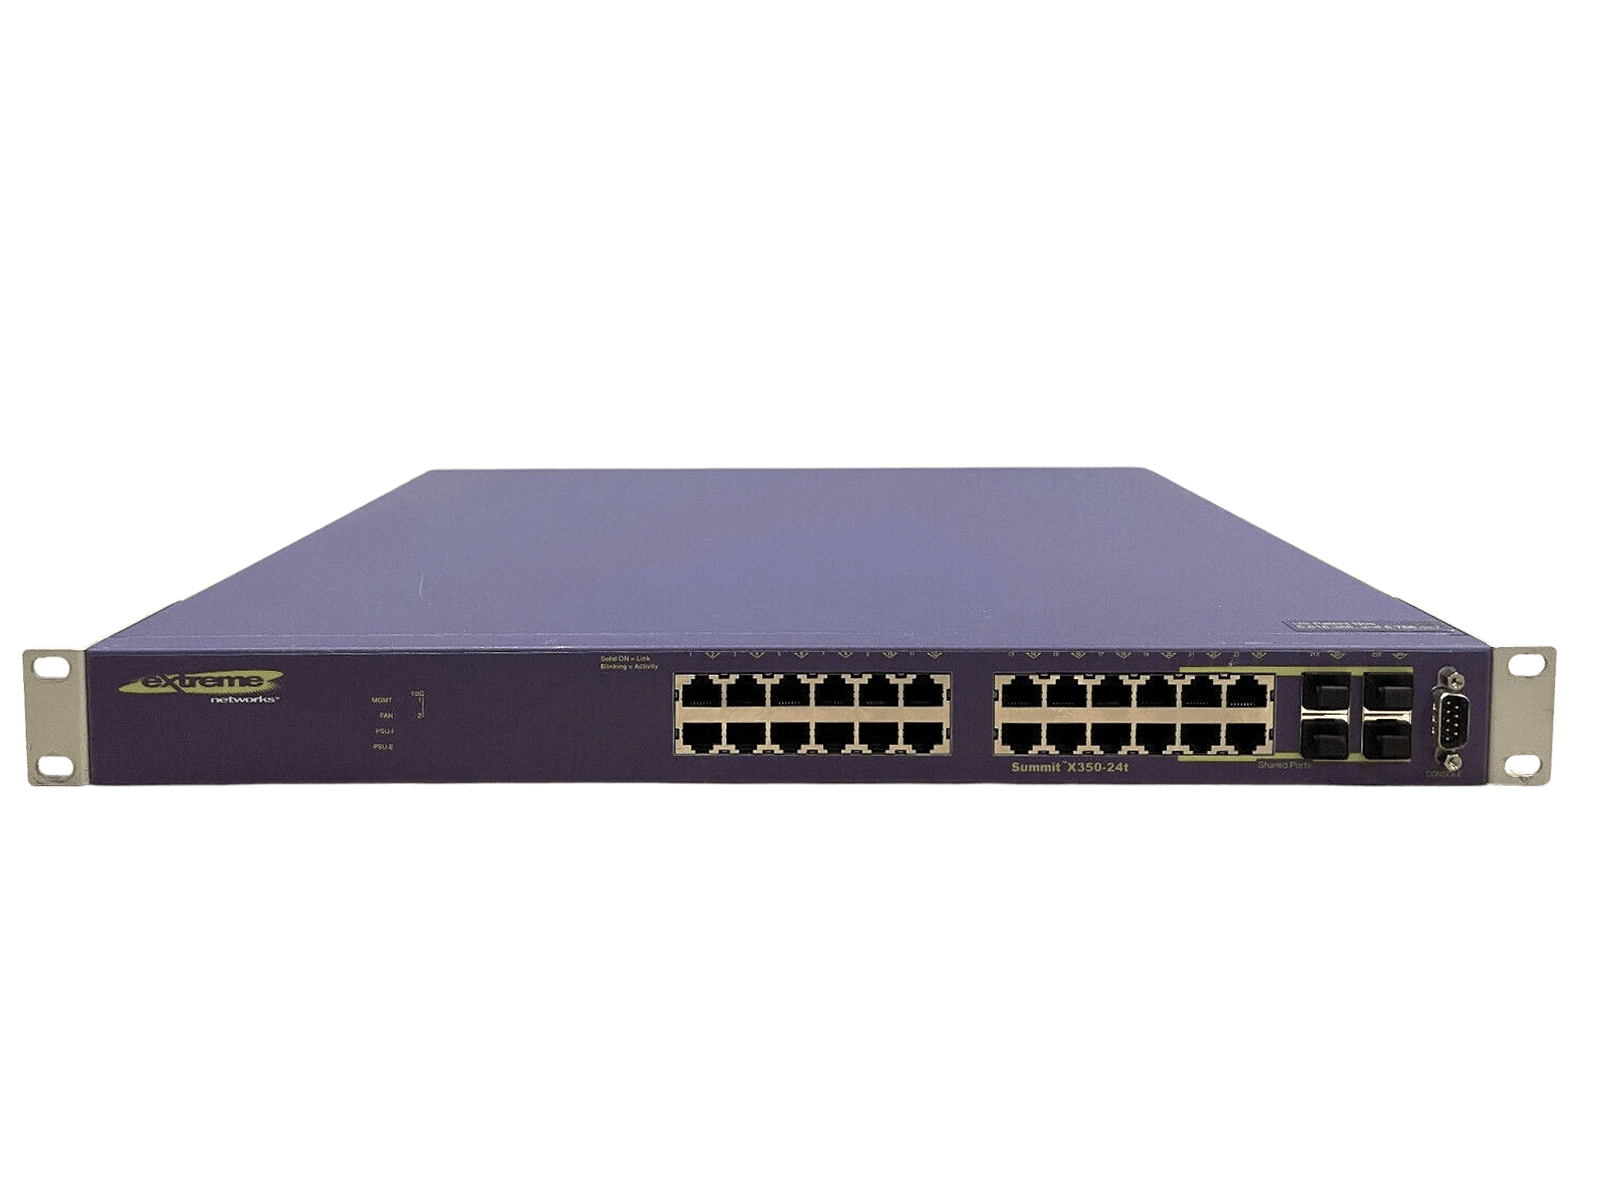 Extreme Networks Summit X350-24T 24-Port RJ45 SFP 1Gbps Ethernet Network Switch.